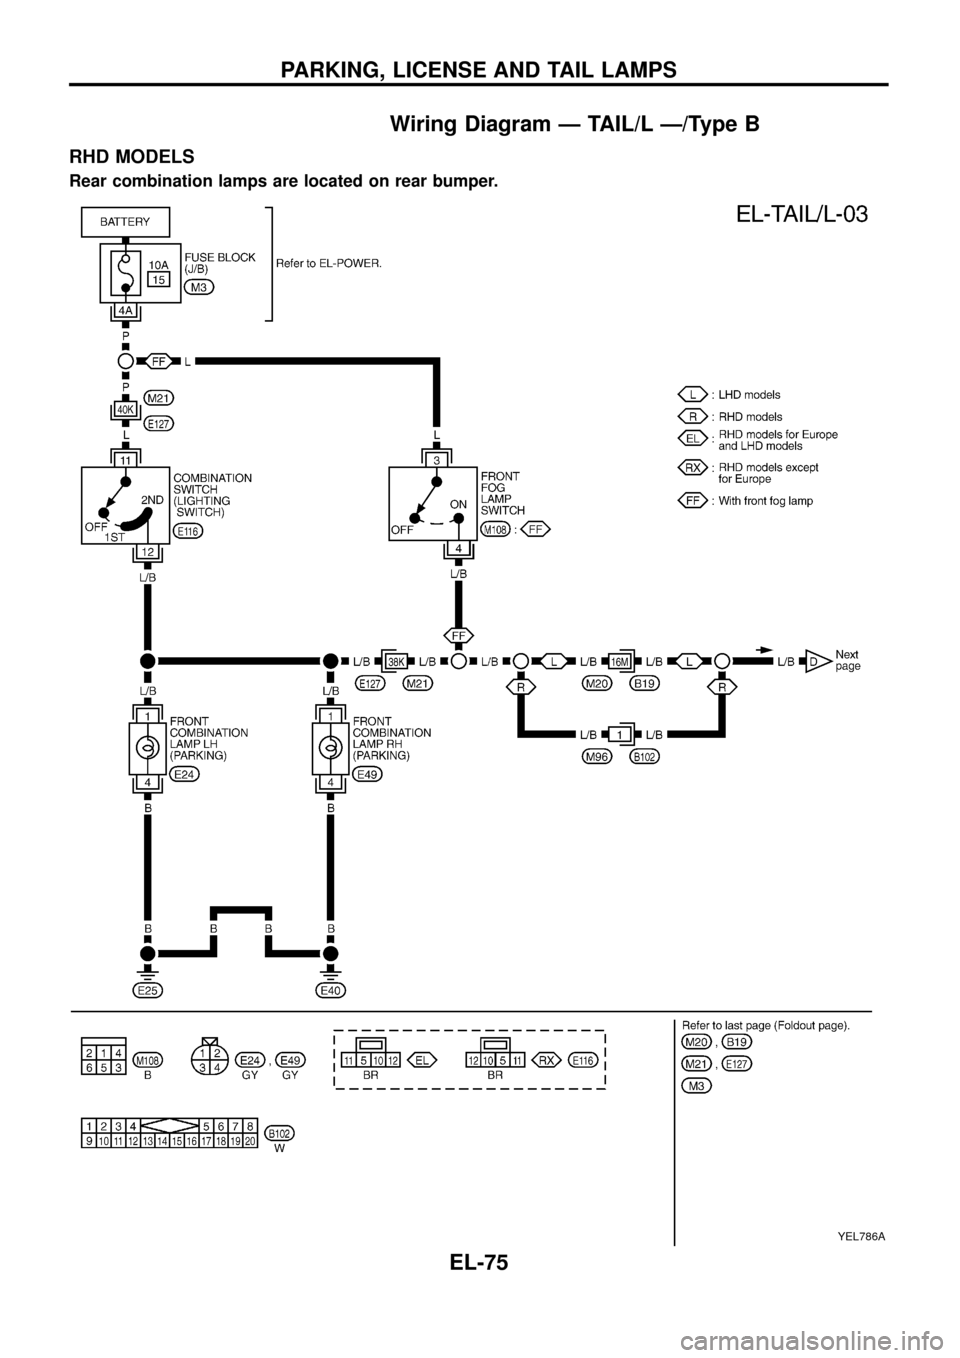 NISSAN PATROL 1998 Y61 / 5.G Electrical System Manual PDF Wiring Diagram Ð TAIL/L Ð/Type B
RHD MODELS
Rear combination lamps are located on rear bumper.
YEL786A
PARKING, LICENSE AND TAIL LAMPS
EL-75 